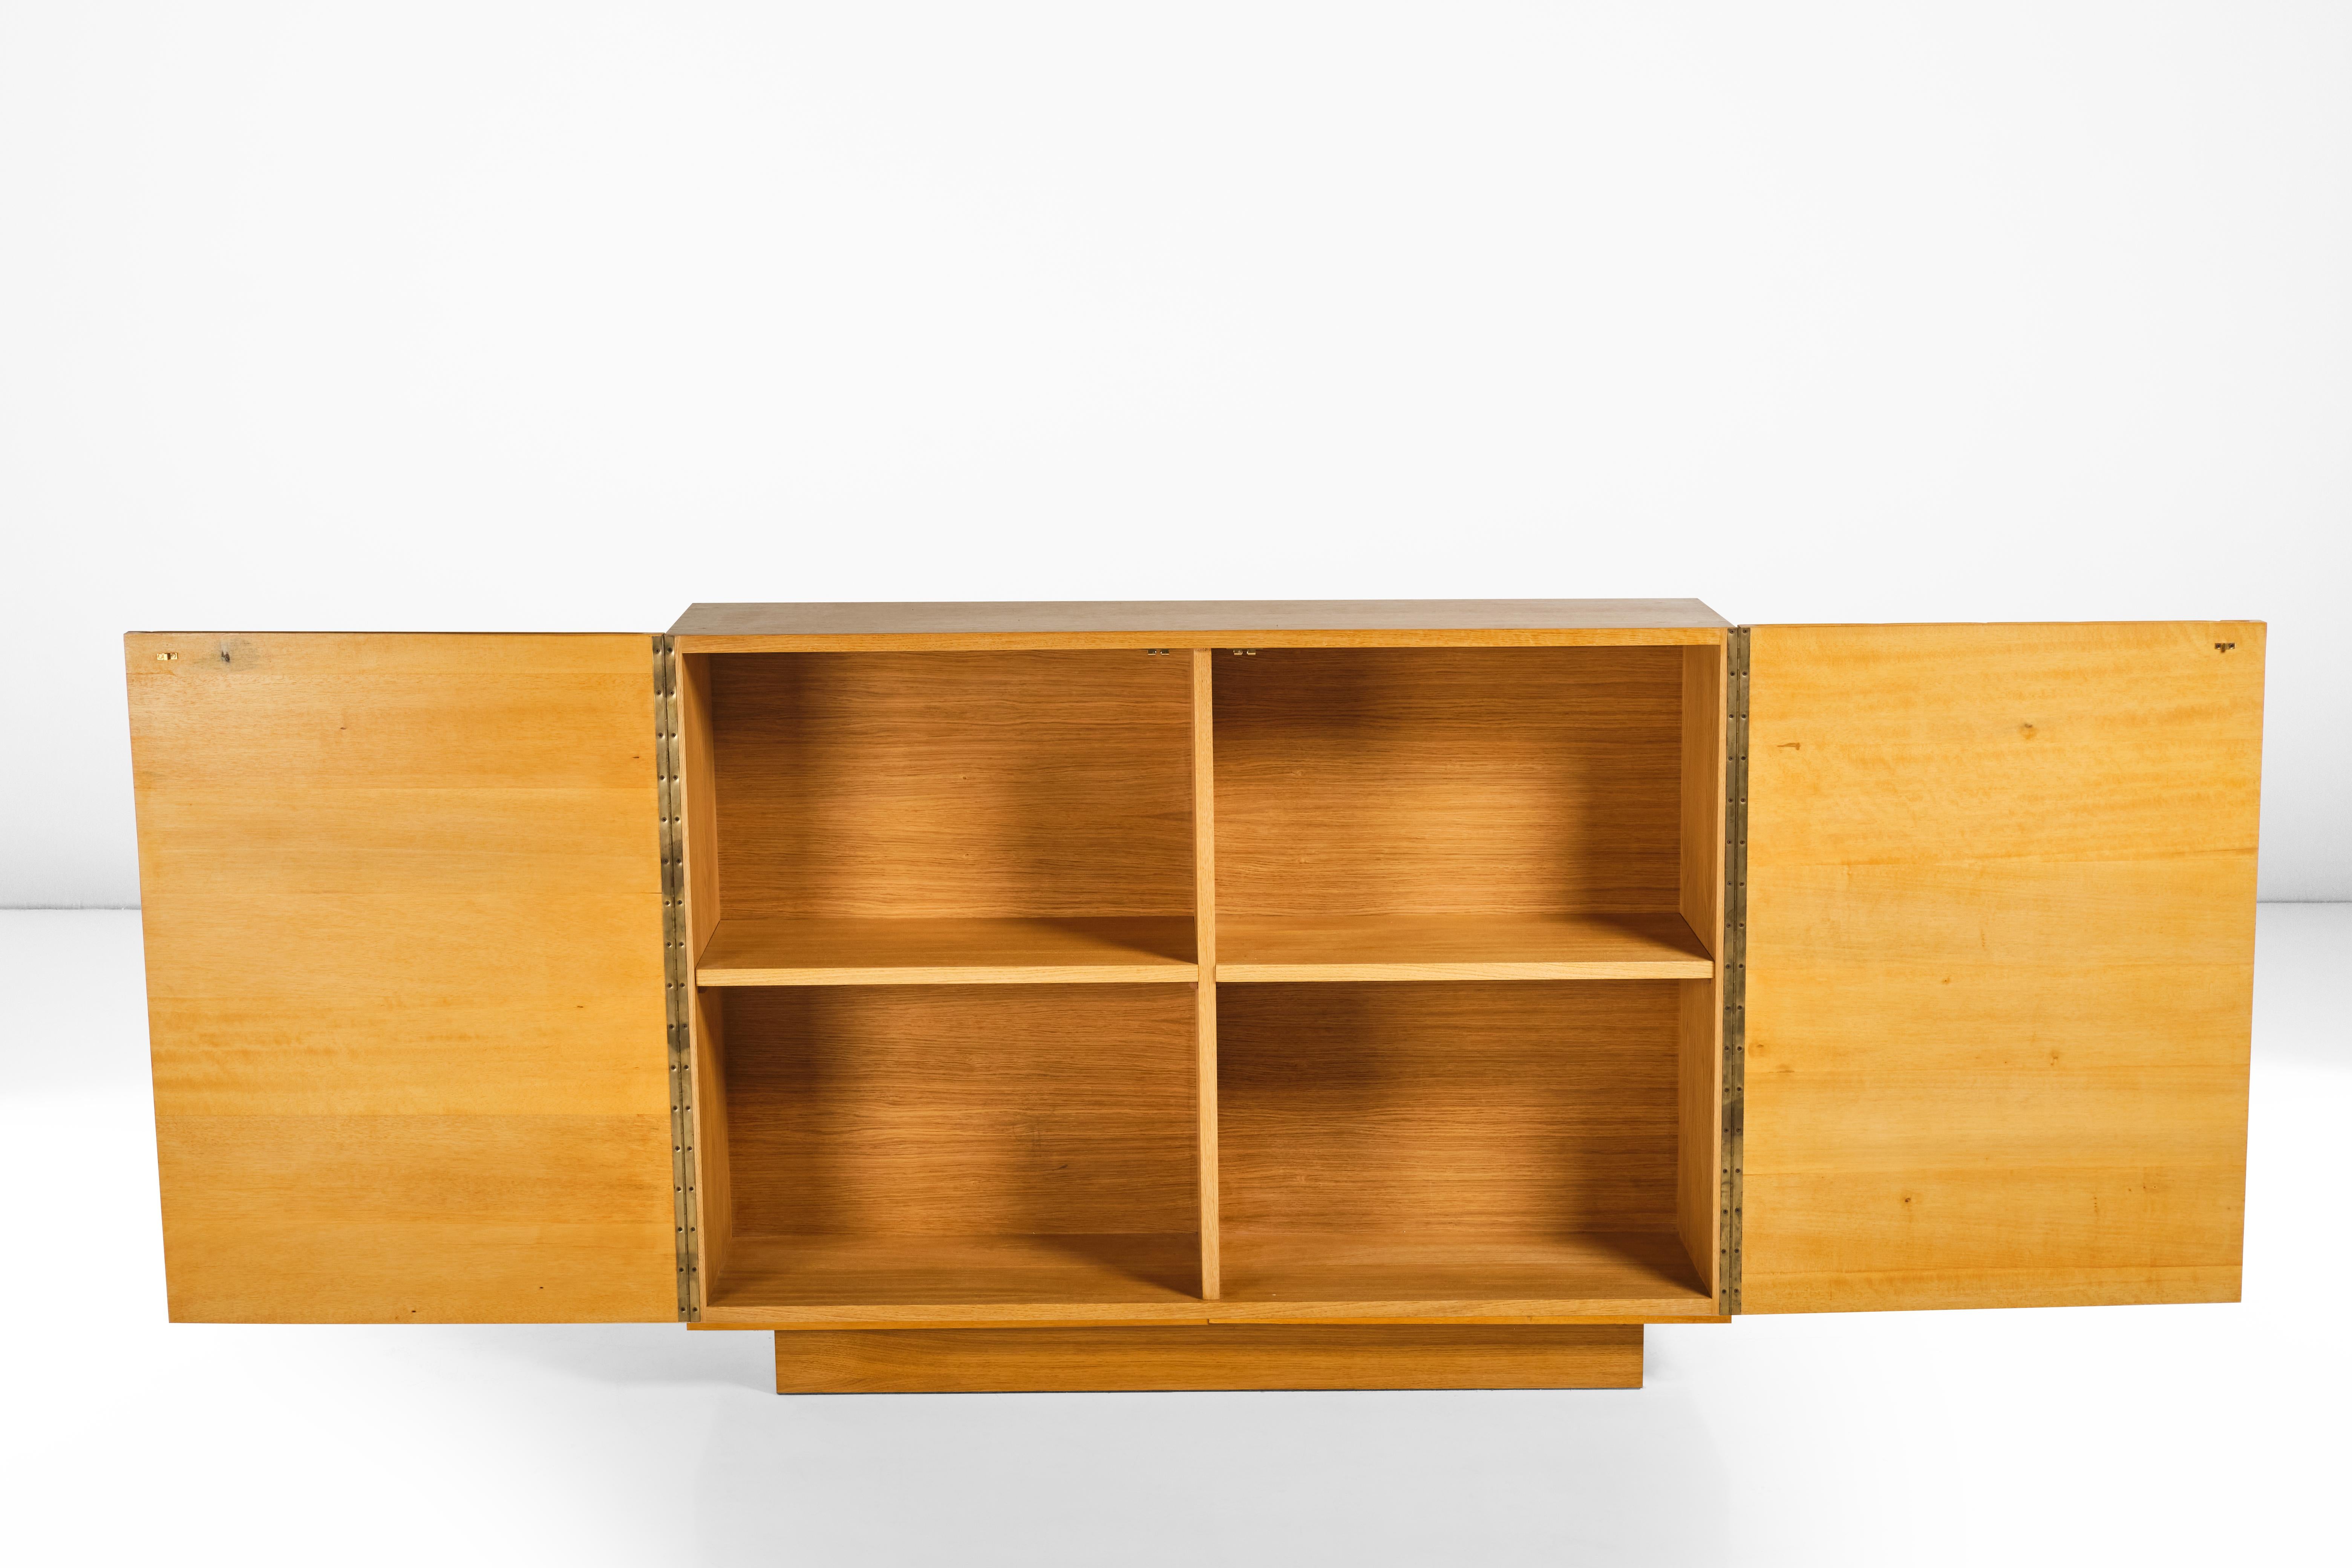 Wood Pair of Sculptural Cabinets, Italian Design, 1960 circa For Sale